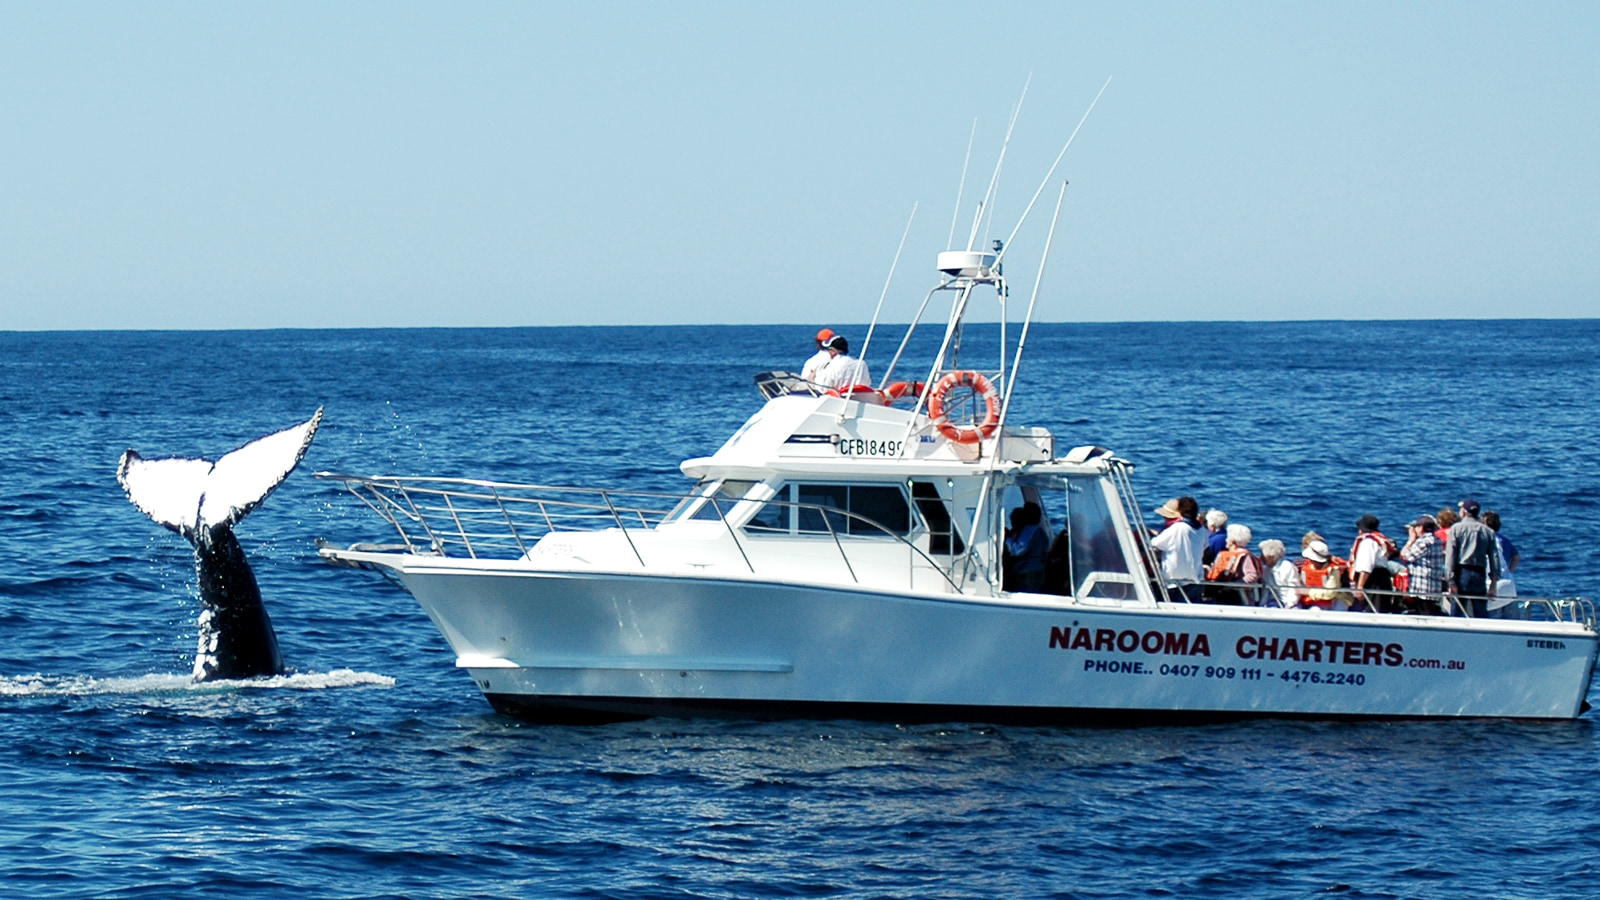 Narooma Charters and Montague Island Tours